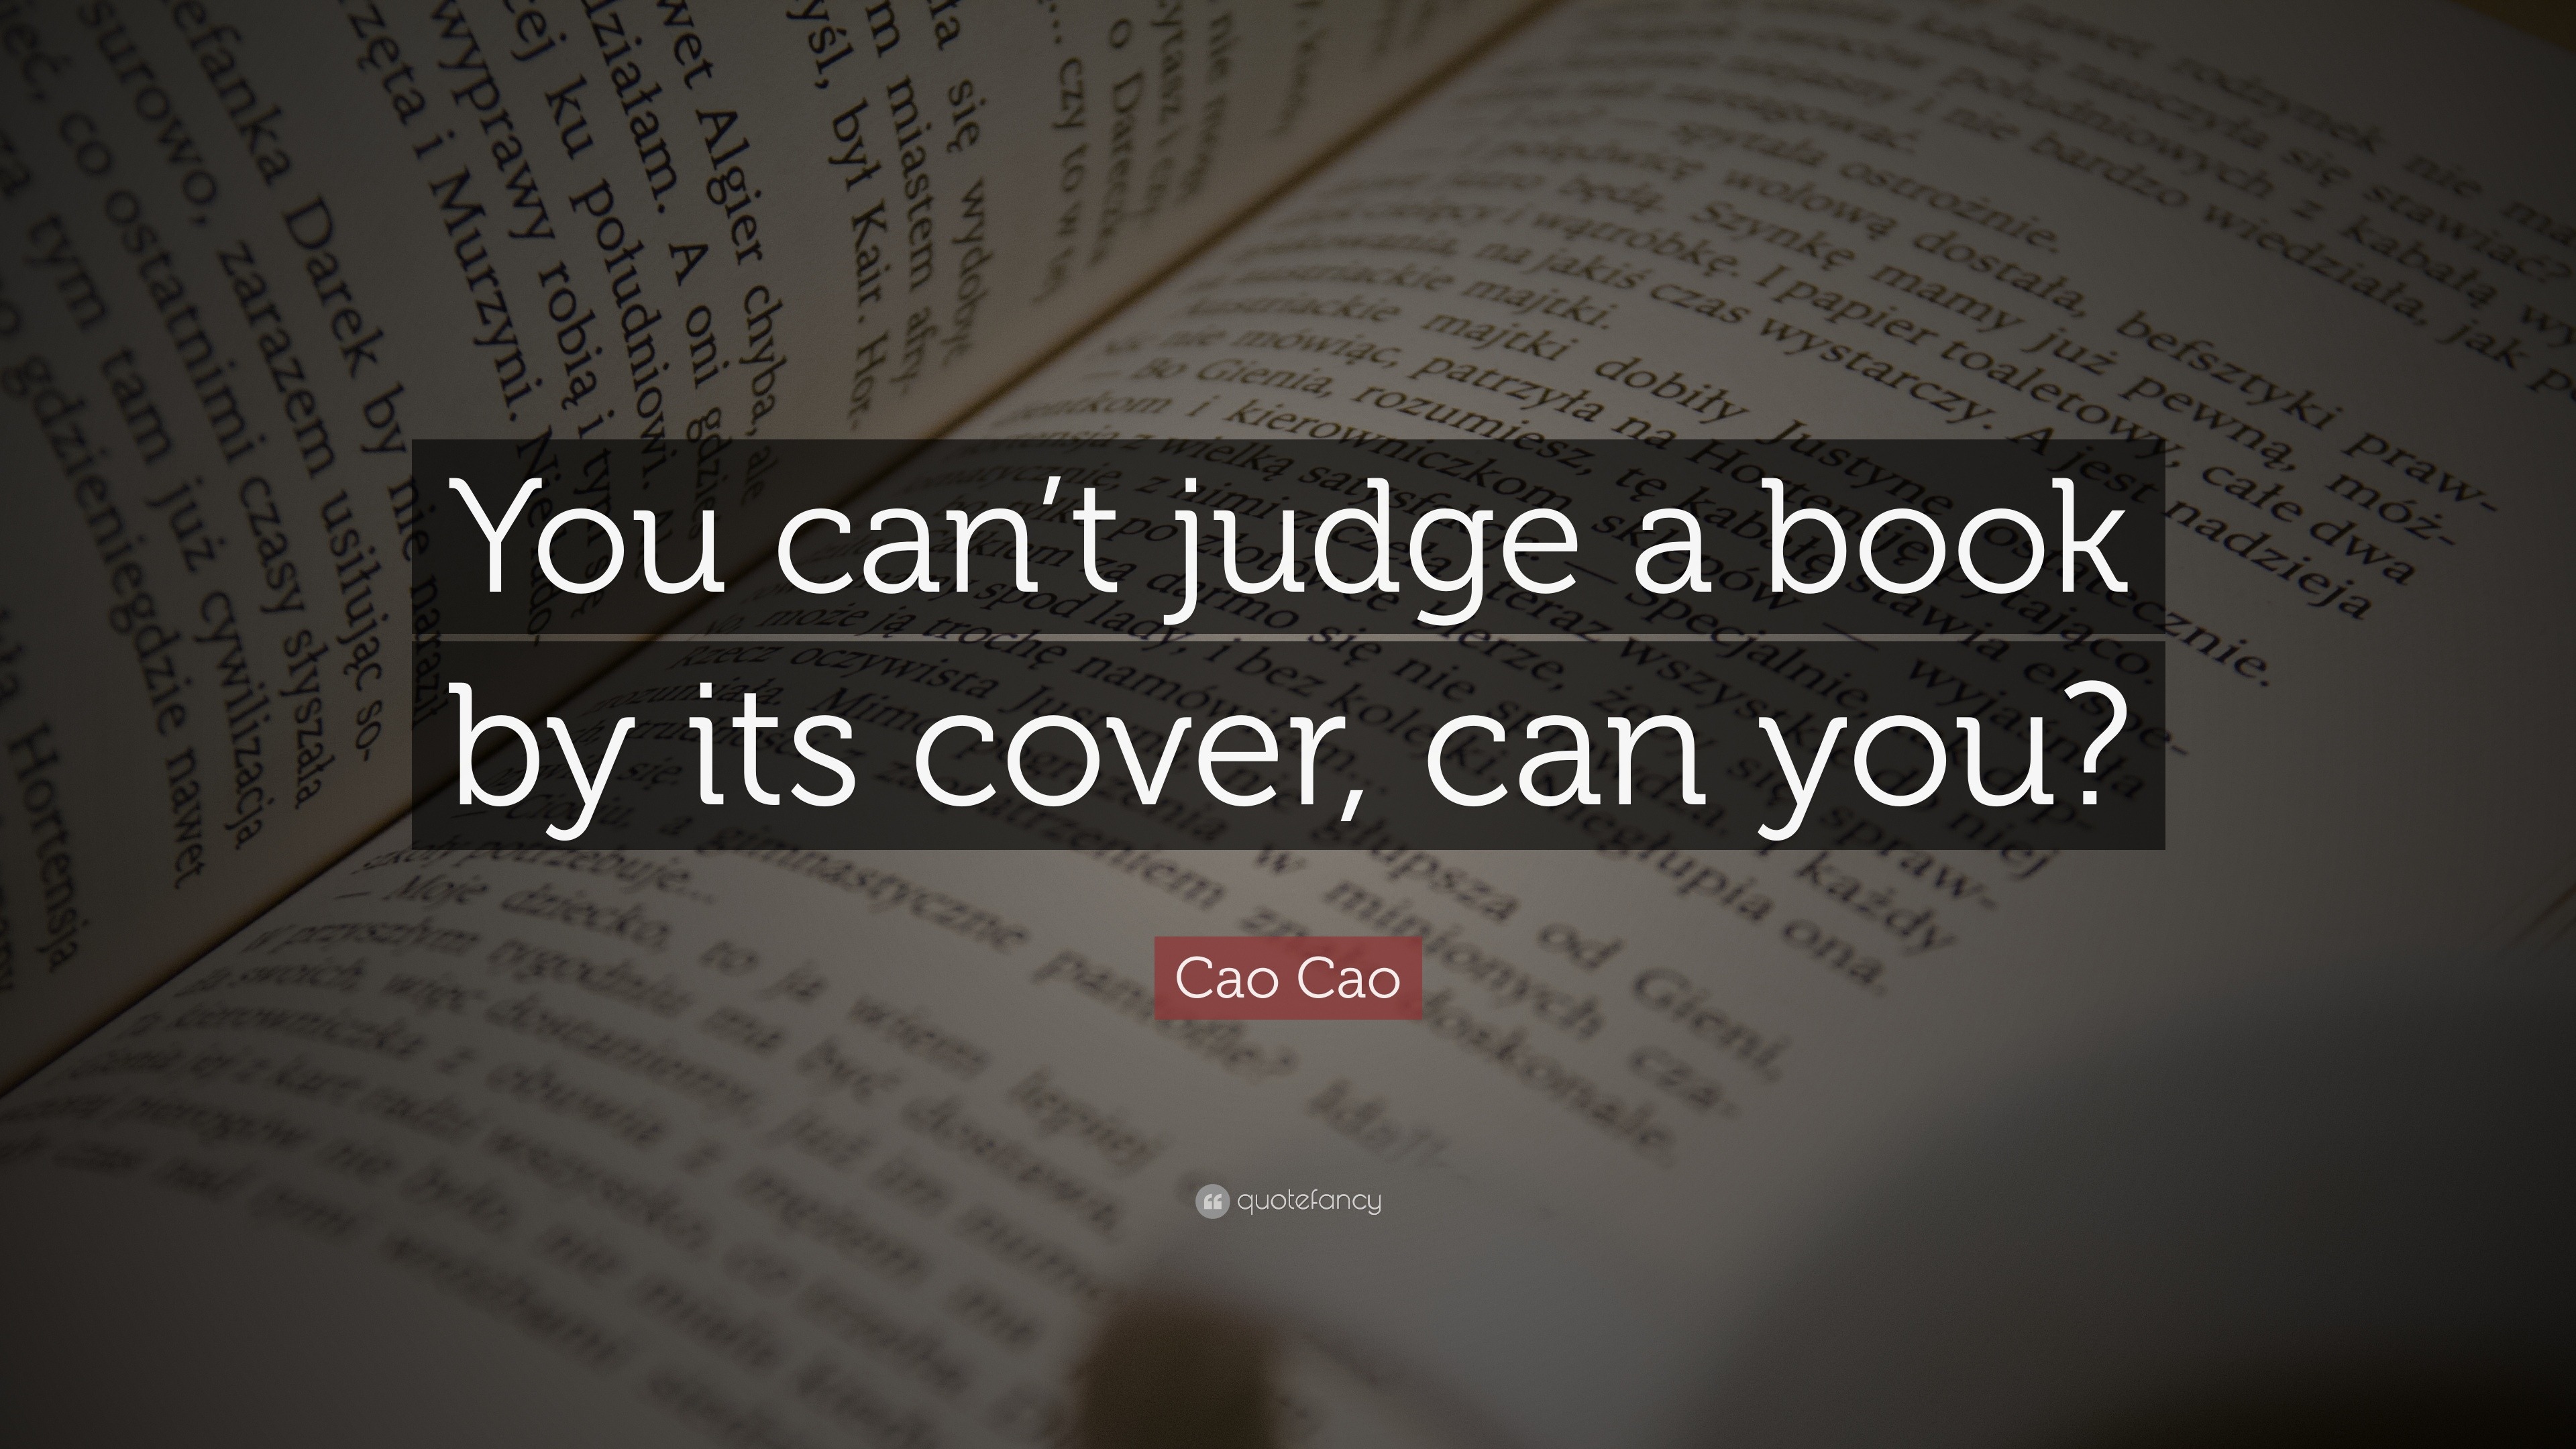 Cao Cao Quote: “You Can't Judge A Book By Its Cover, Can You?”